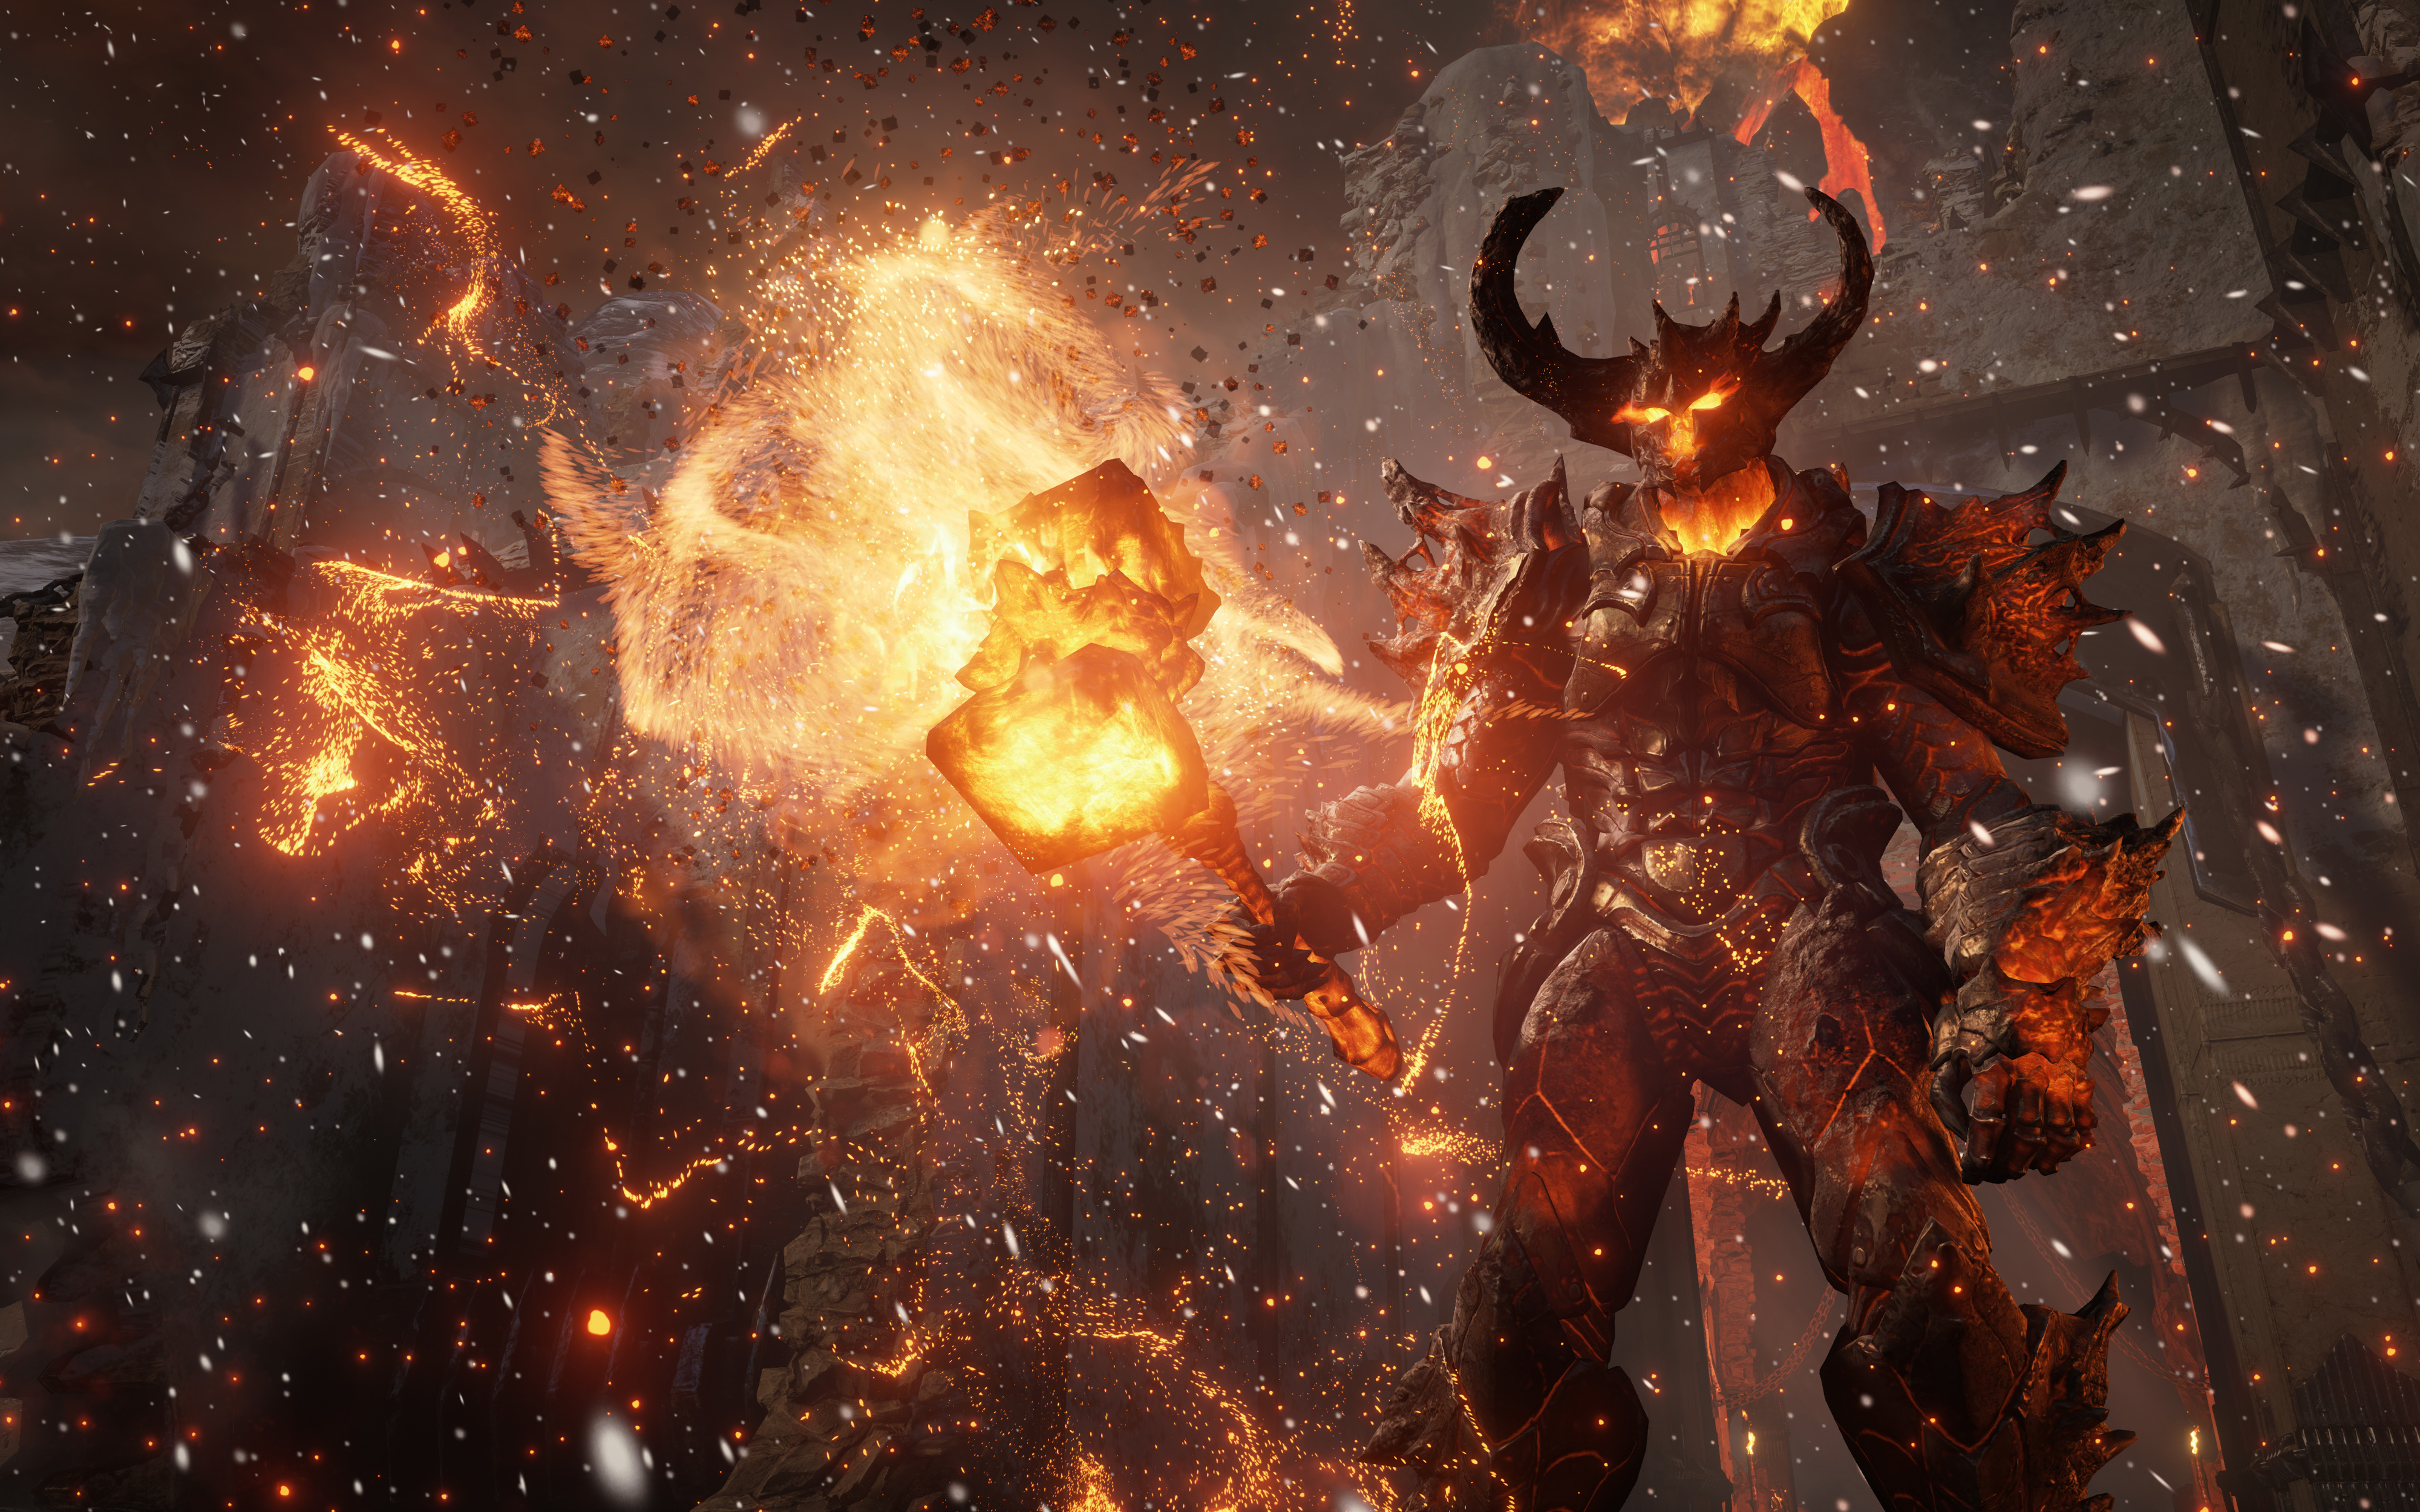 epic 4k wallpapers,demon,fictional character,geological phenomenon,cg artwork,space